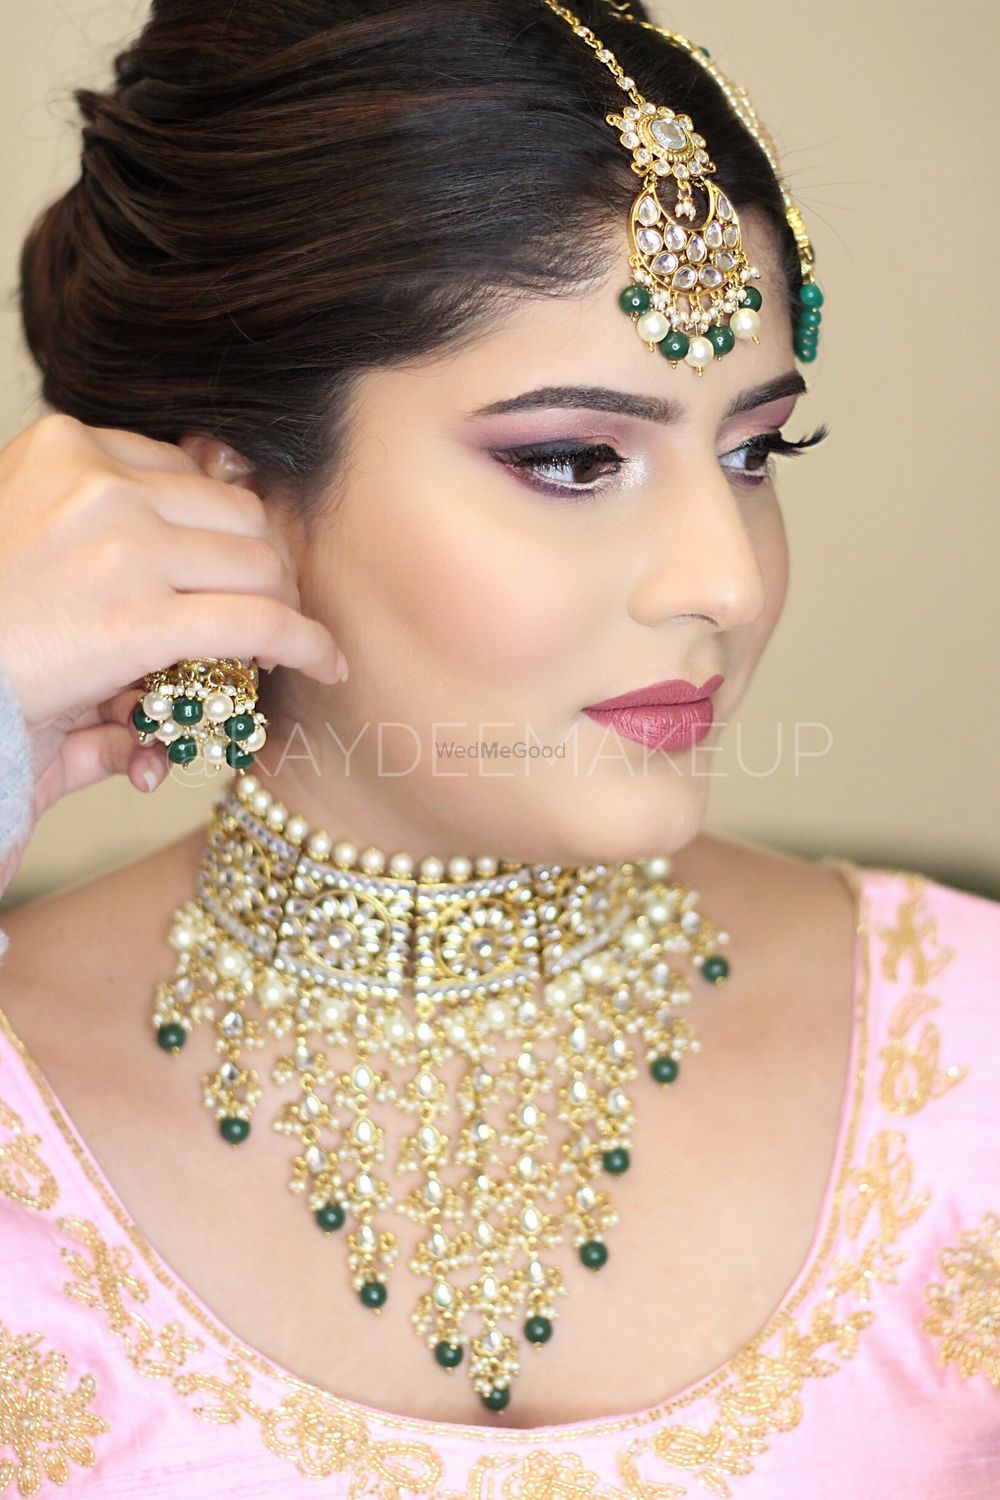 Photo From Brides 2018 - By KayDee Makeup Artist